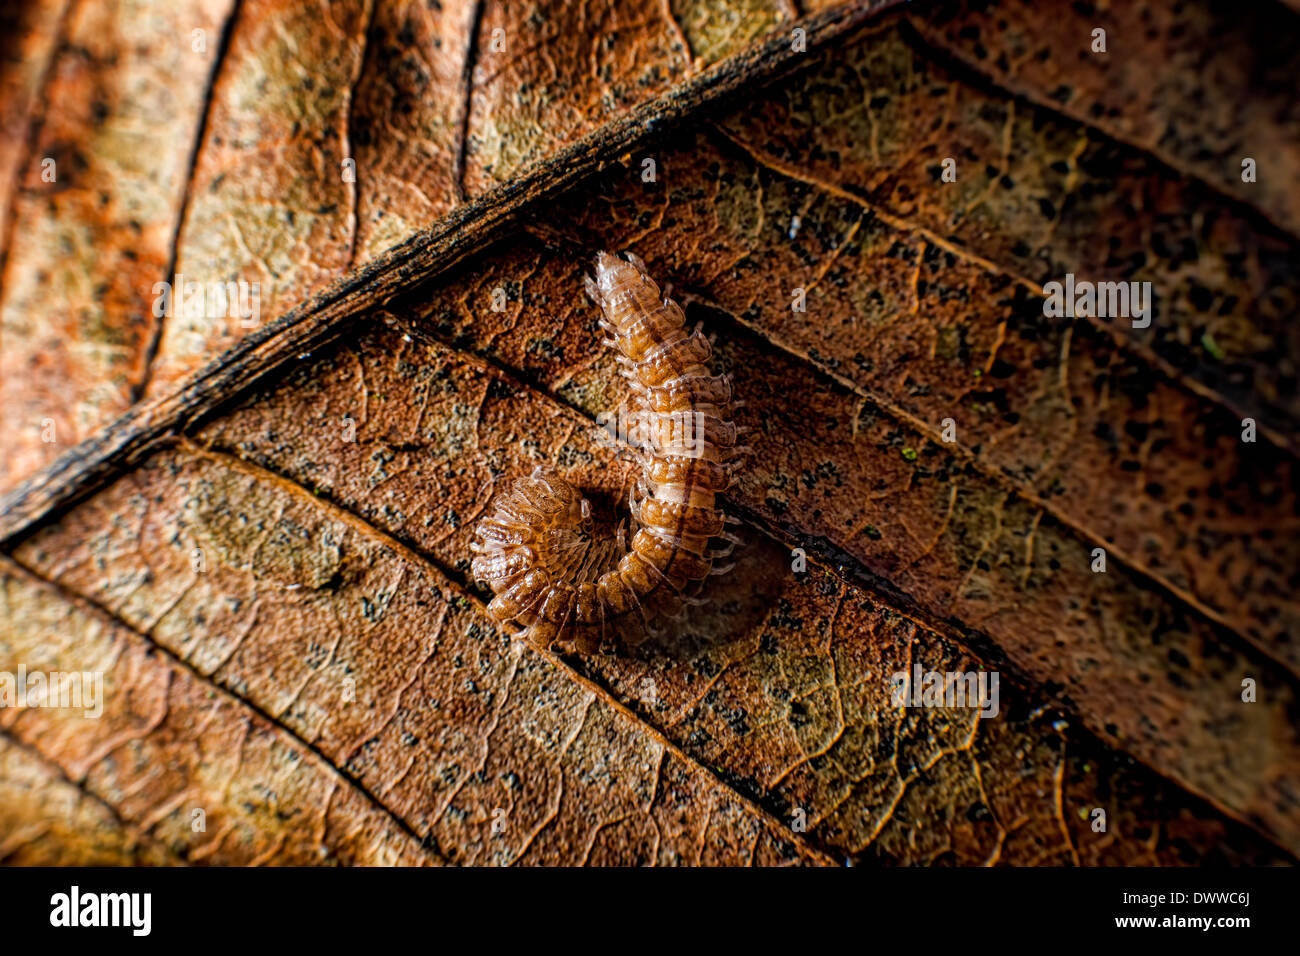 Flat backed millipede resting on a dead leaf Stock Photo